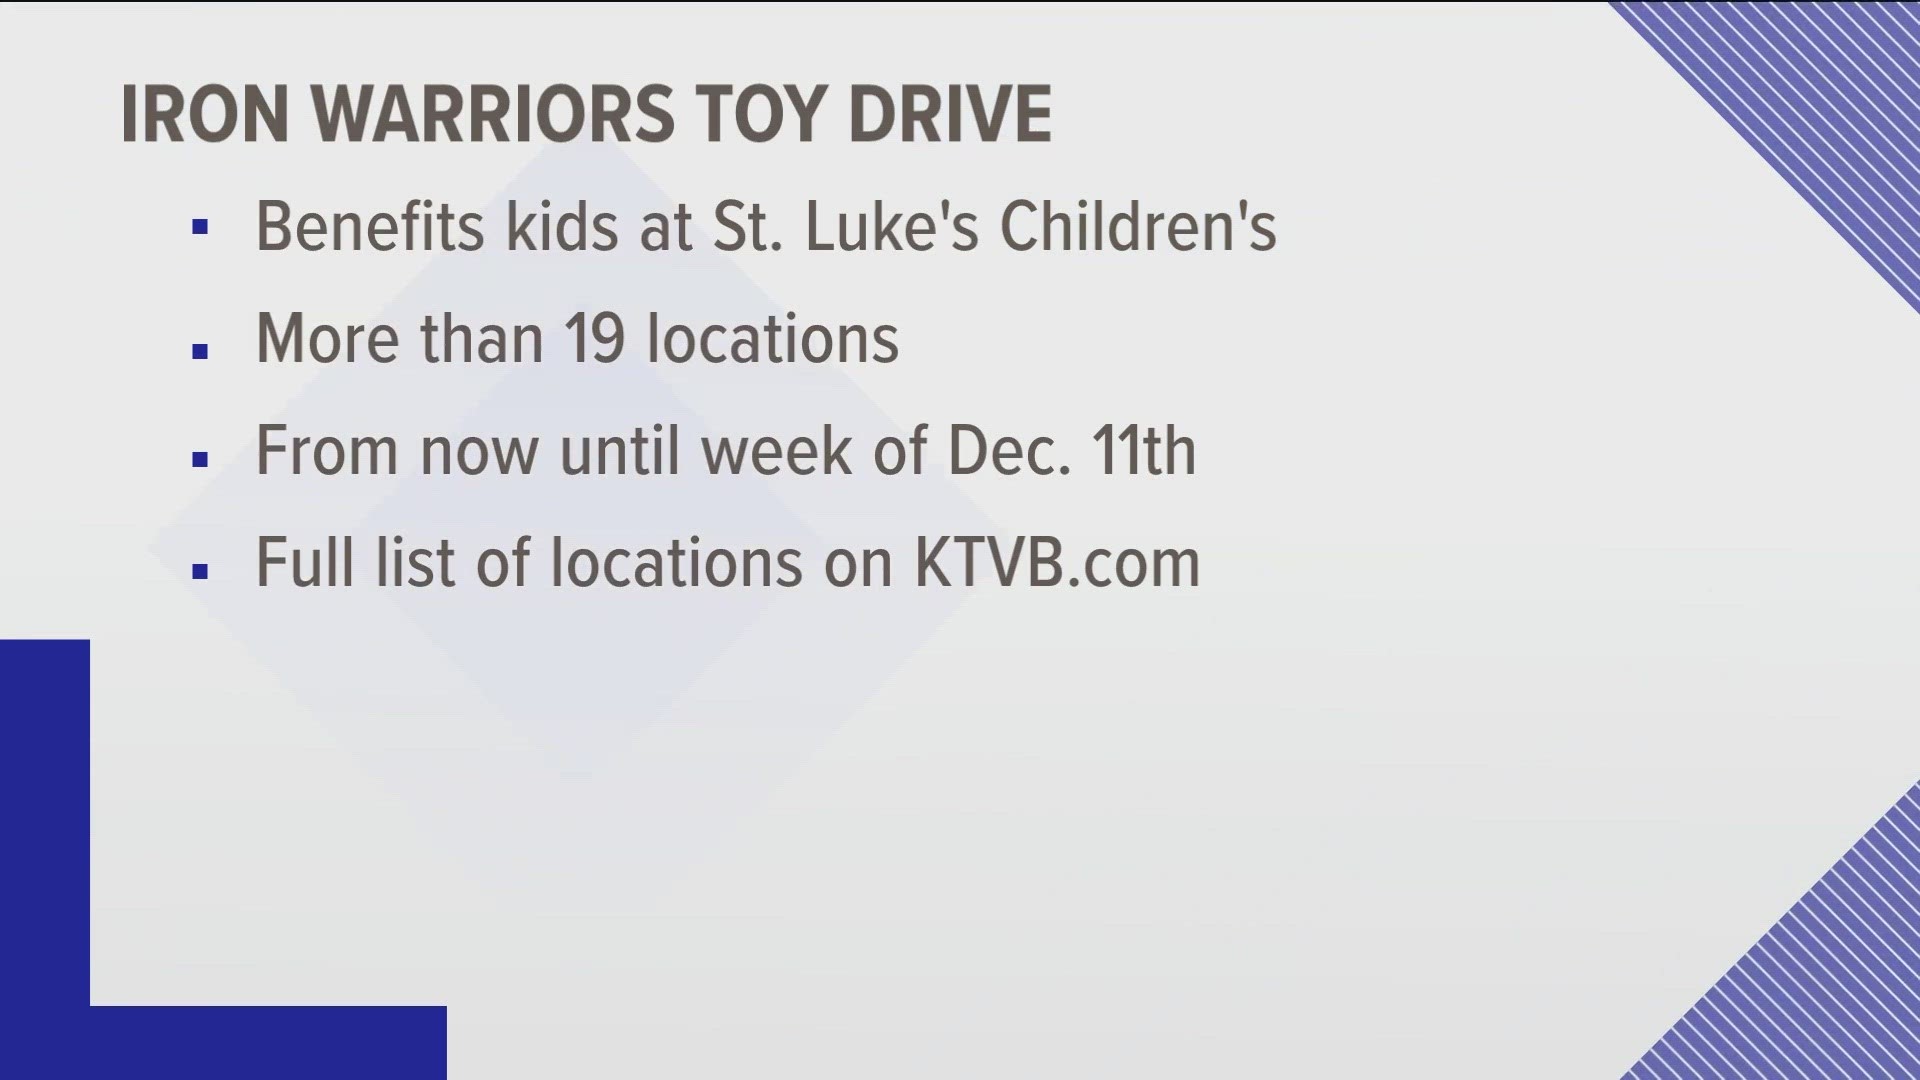 The drive benefits kids at St. Luke's. Last year, organizers gave over 1,250 toys to the hospital. People can drop off toys at over eighteen different locations.